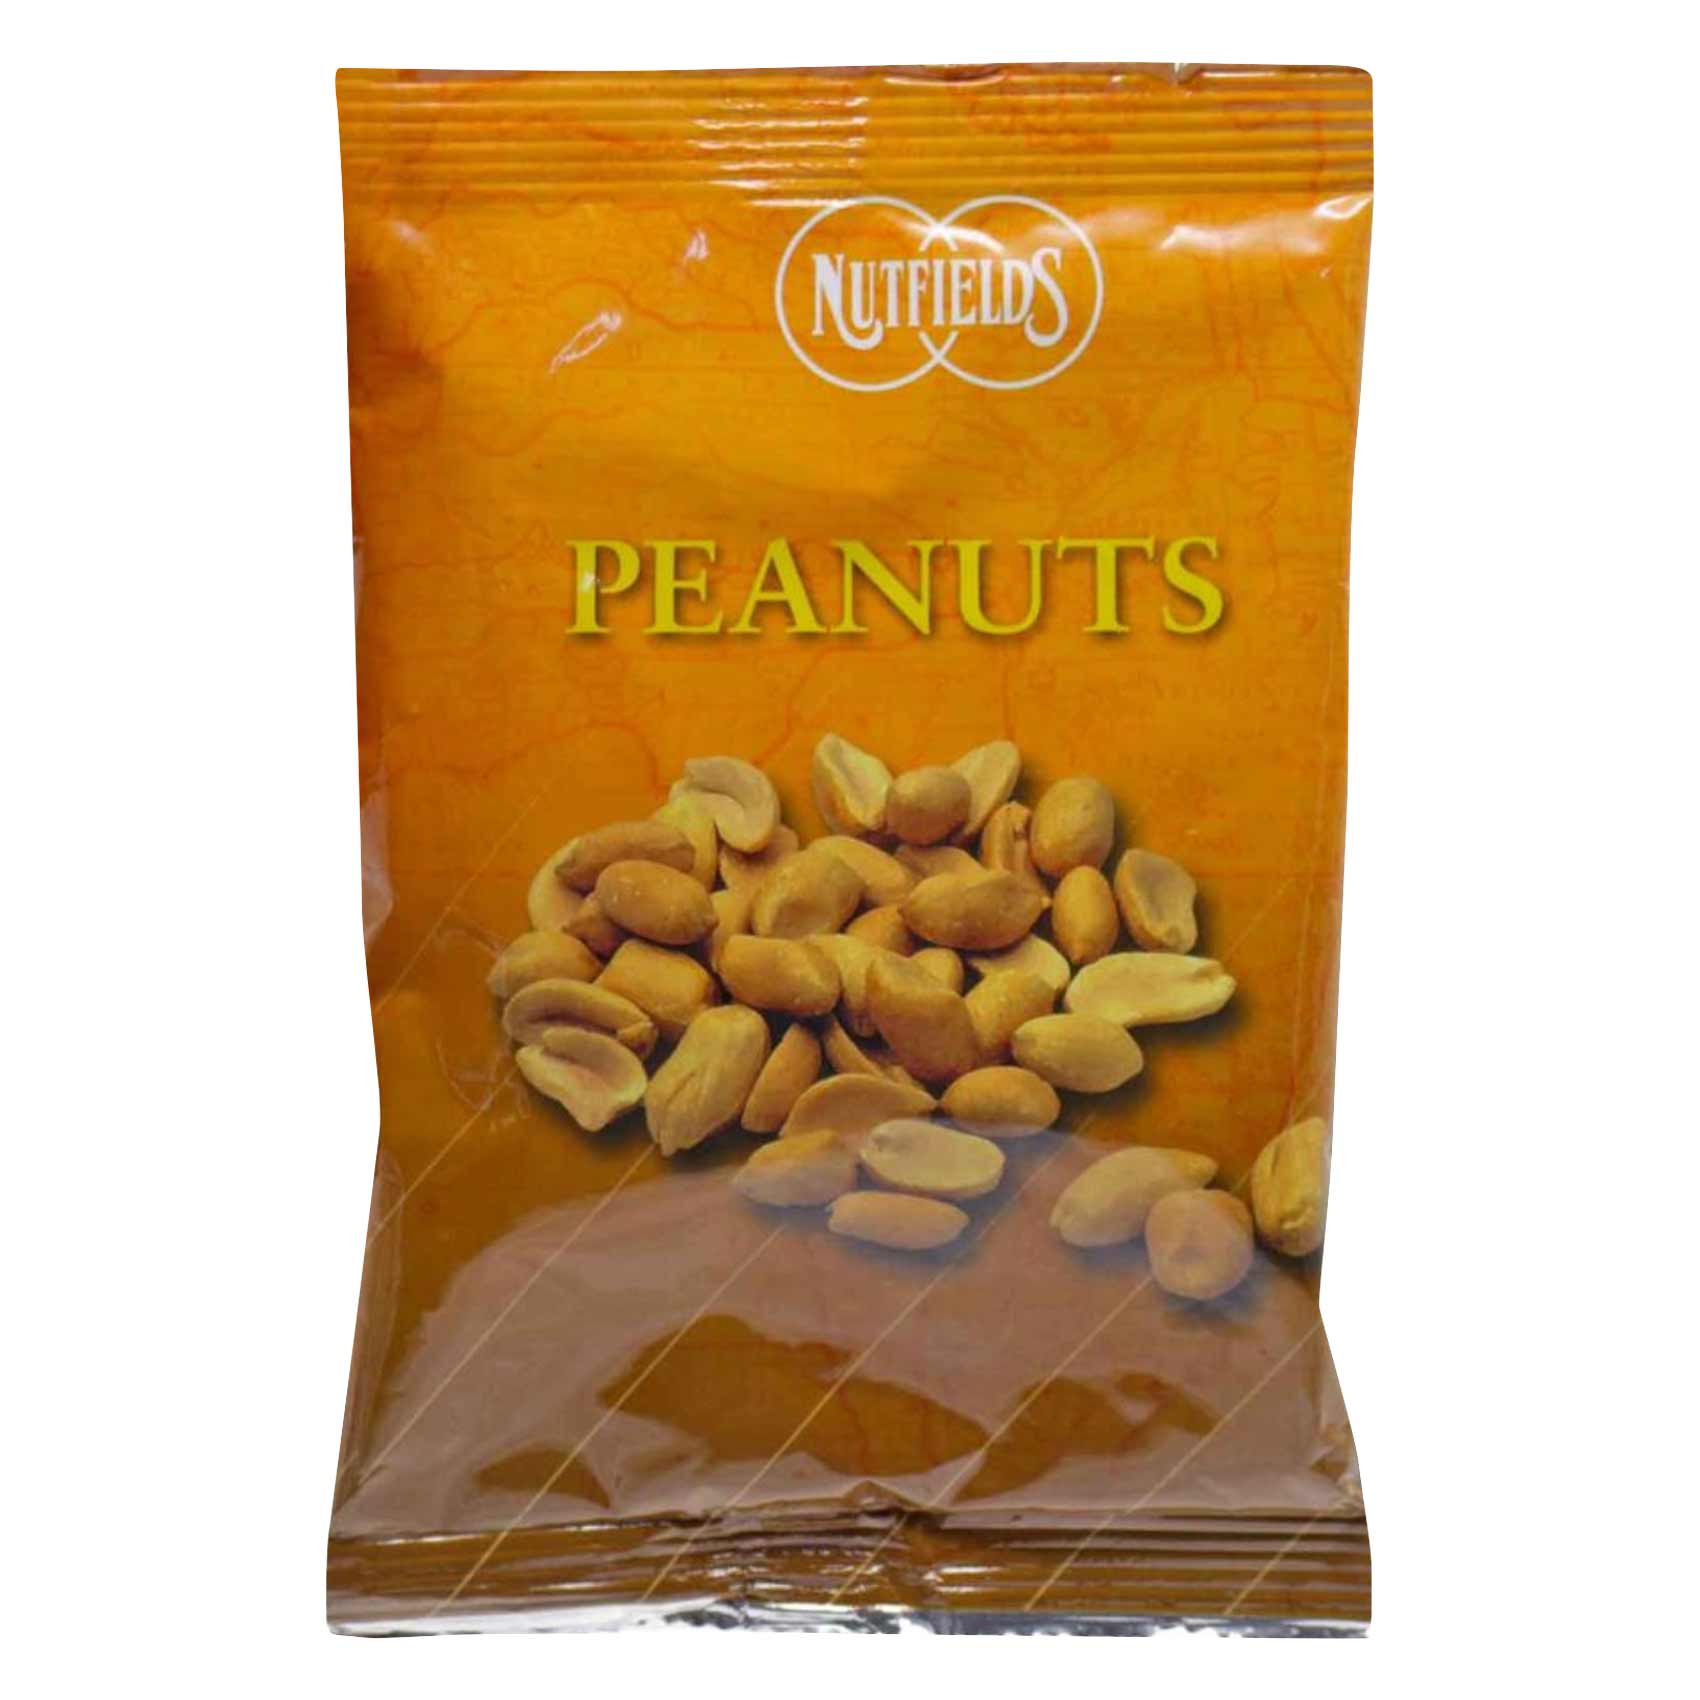 Nutfields Dry Roasted And Salted Peanuts 250g